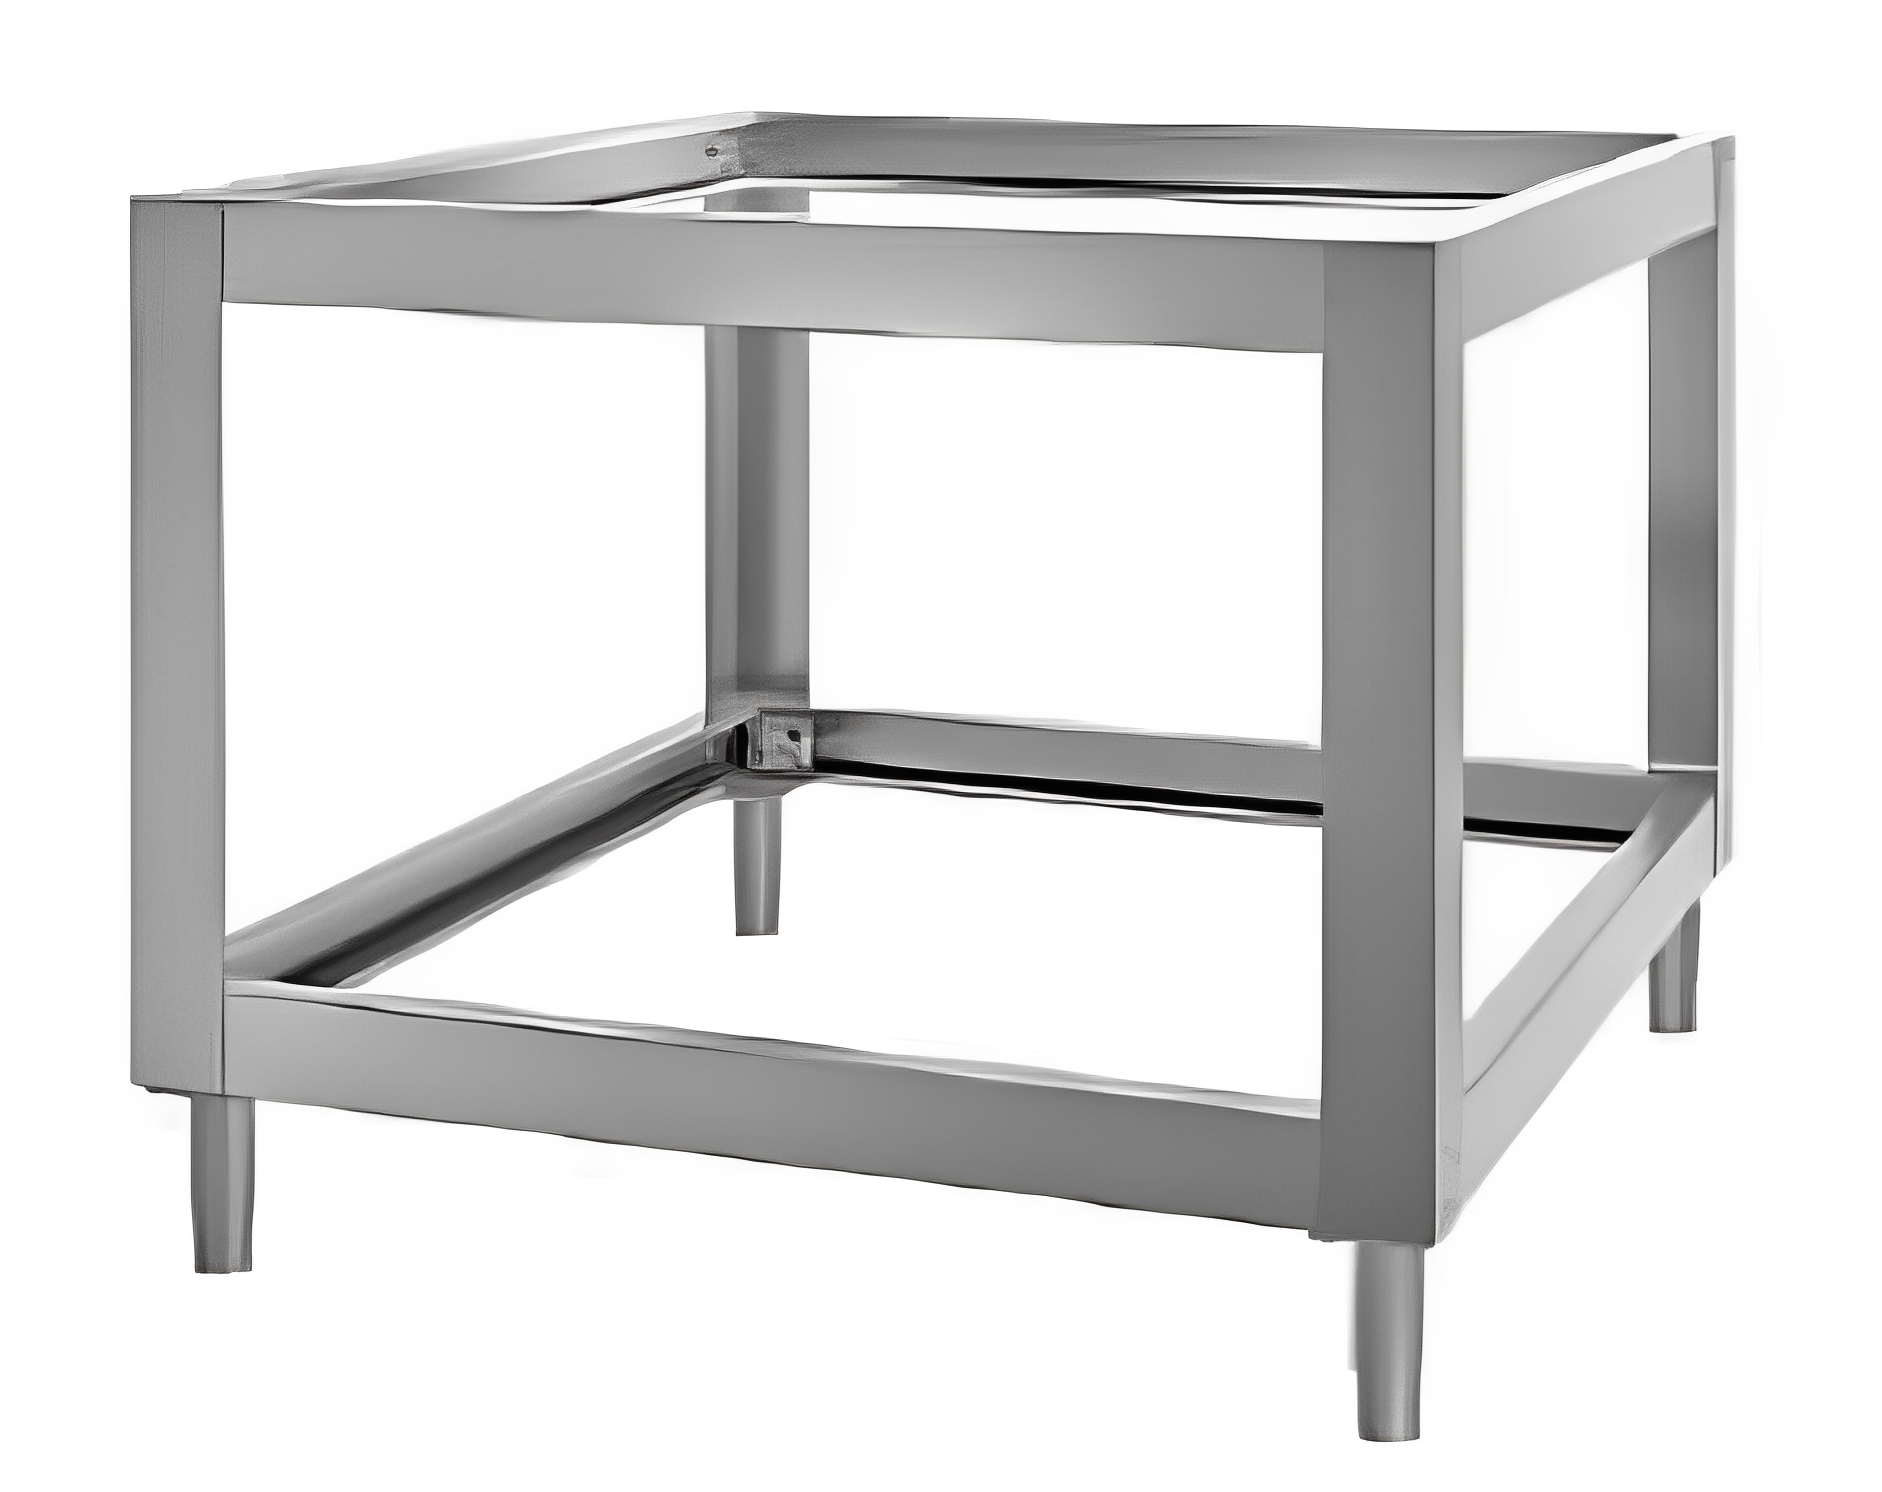 PIZZAGROUP Entry Max S6 Stands in stainless steel